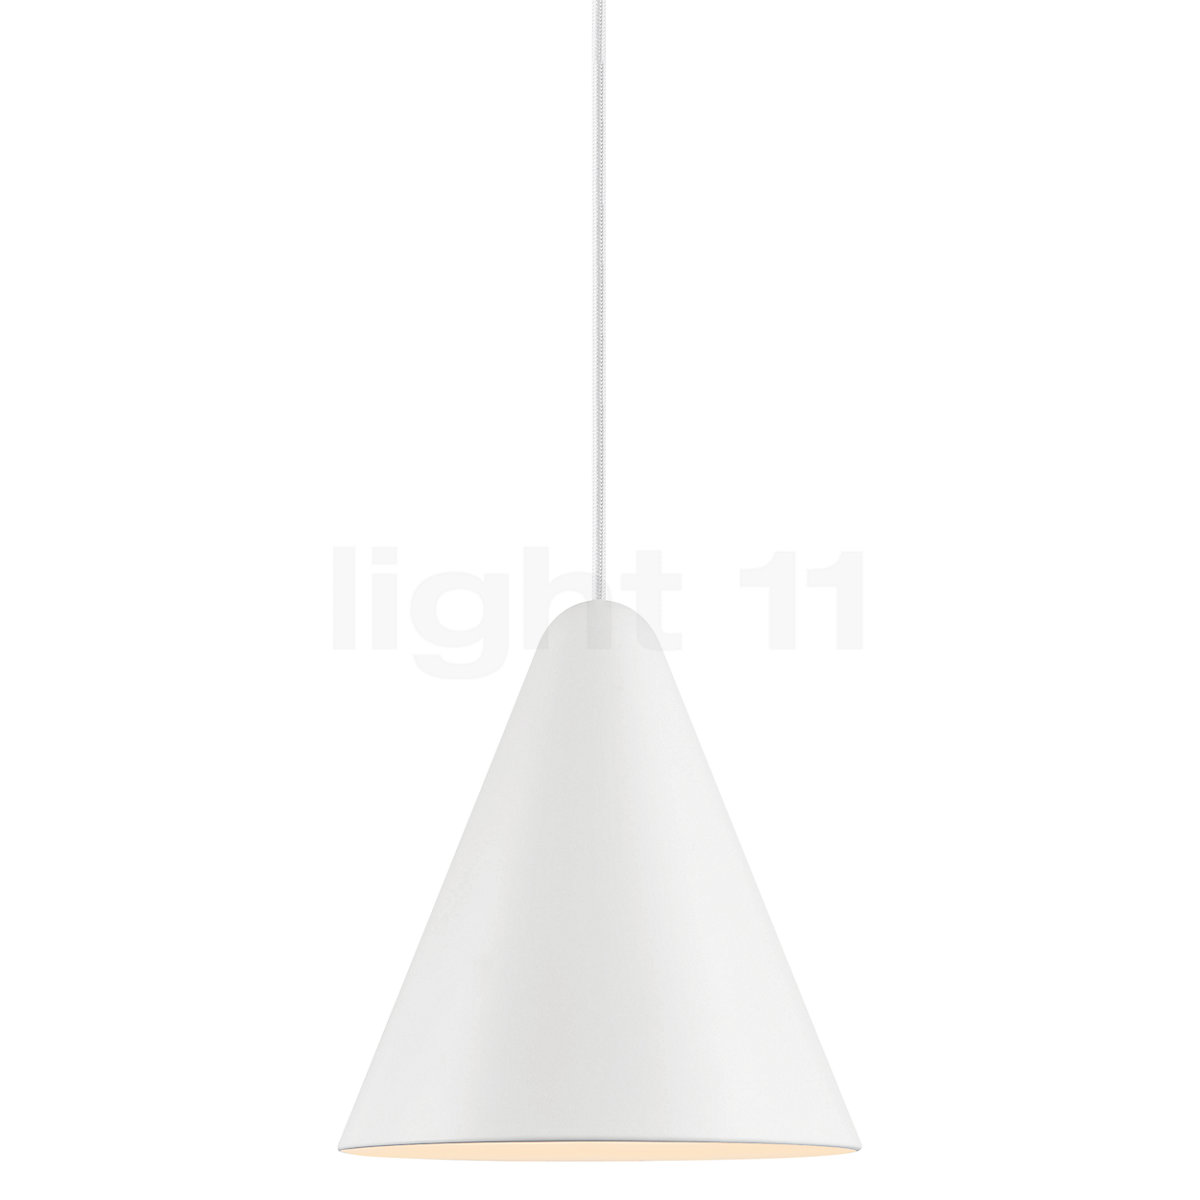 Buy Design for the People at Nono Light Pendant